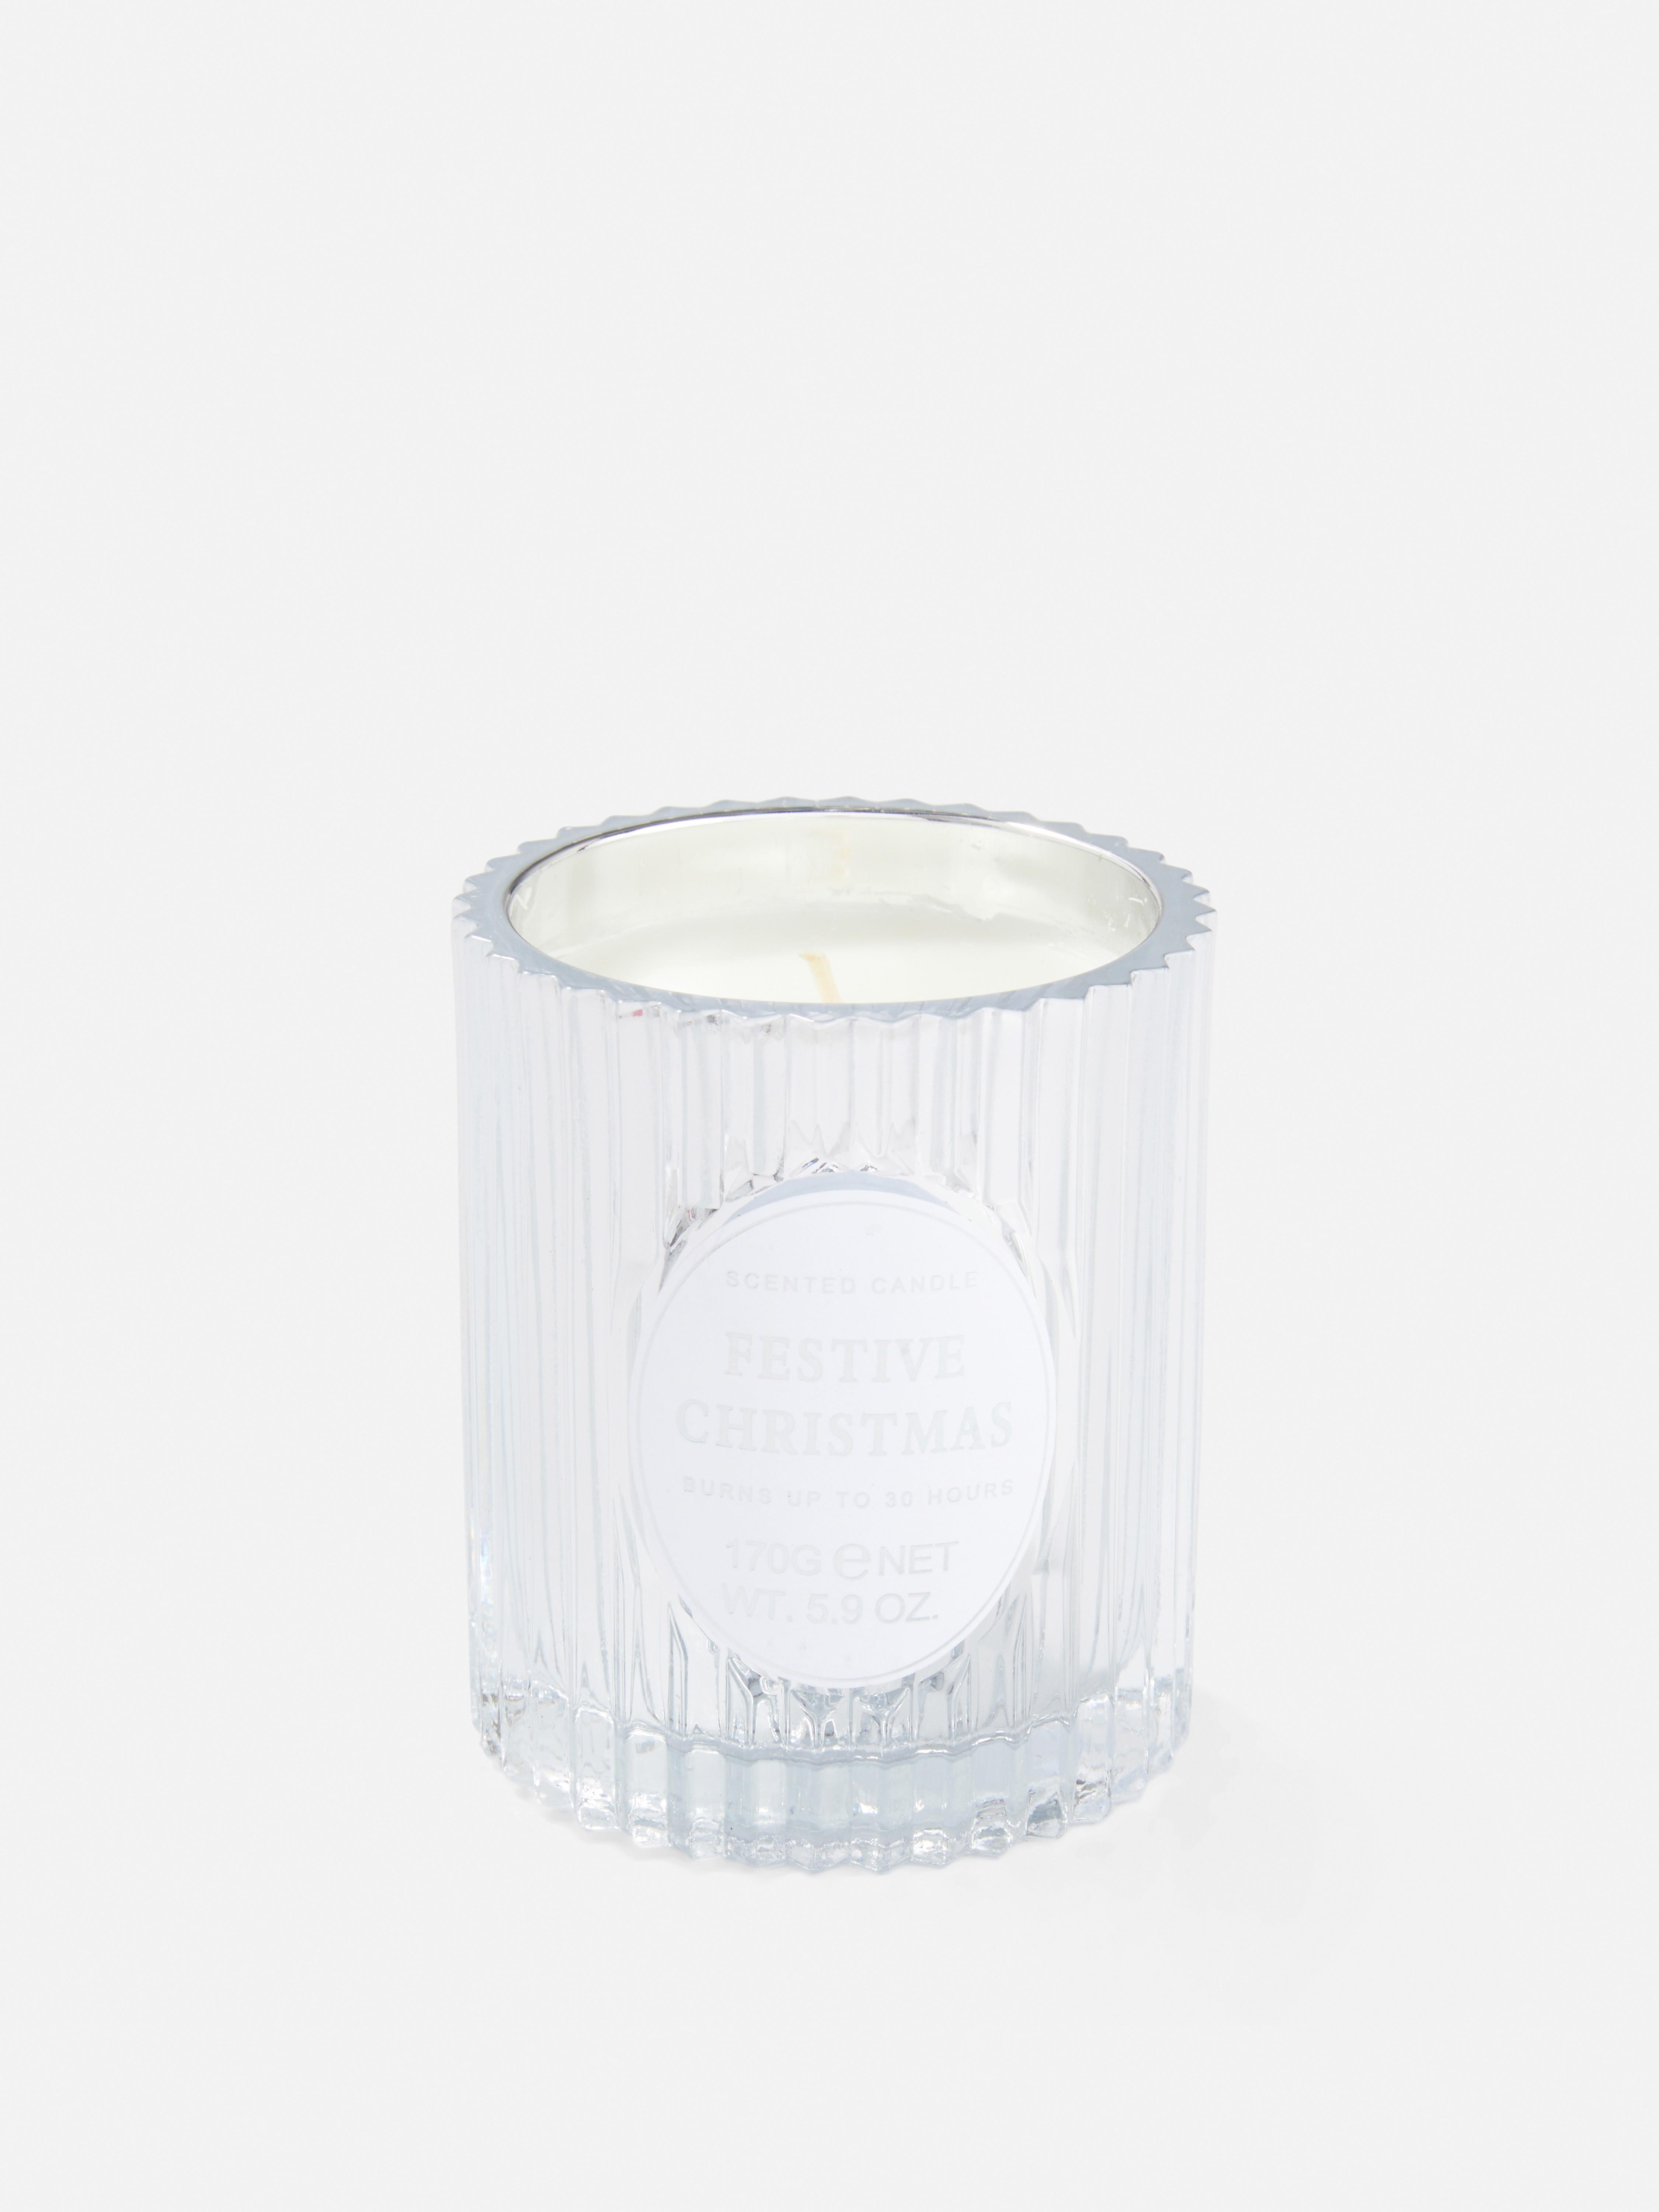 Ridged Votive Scented Candle